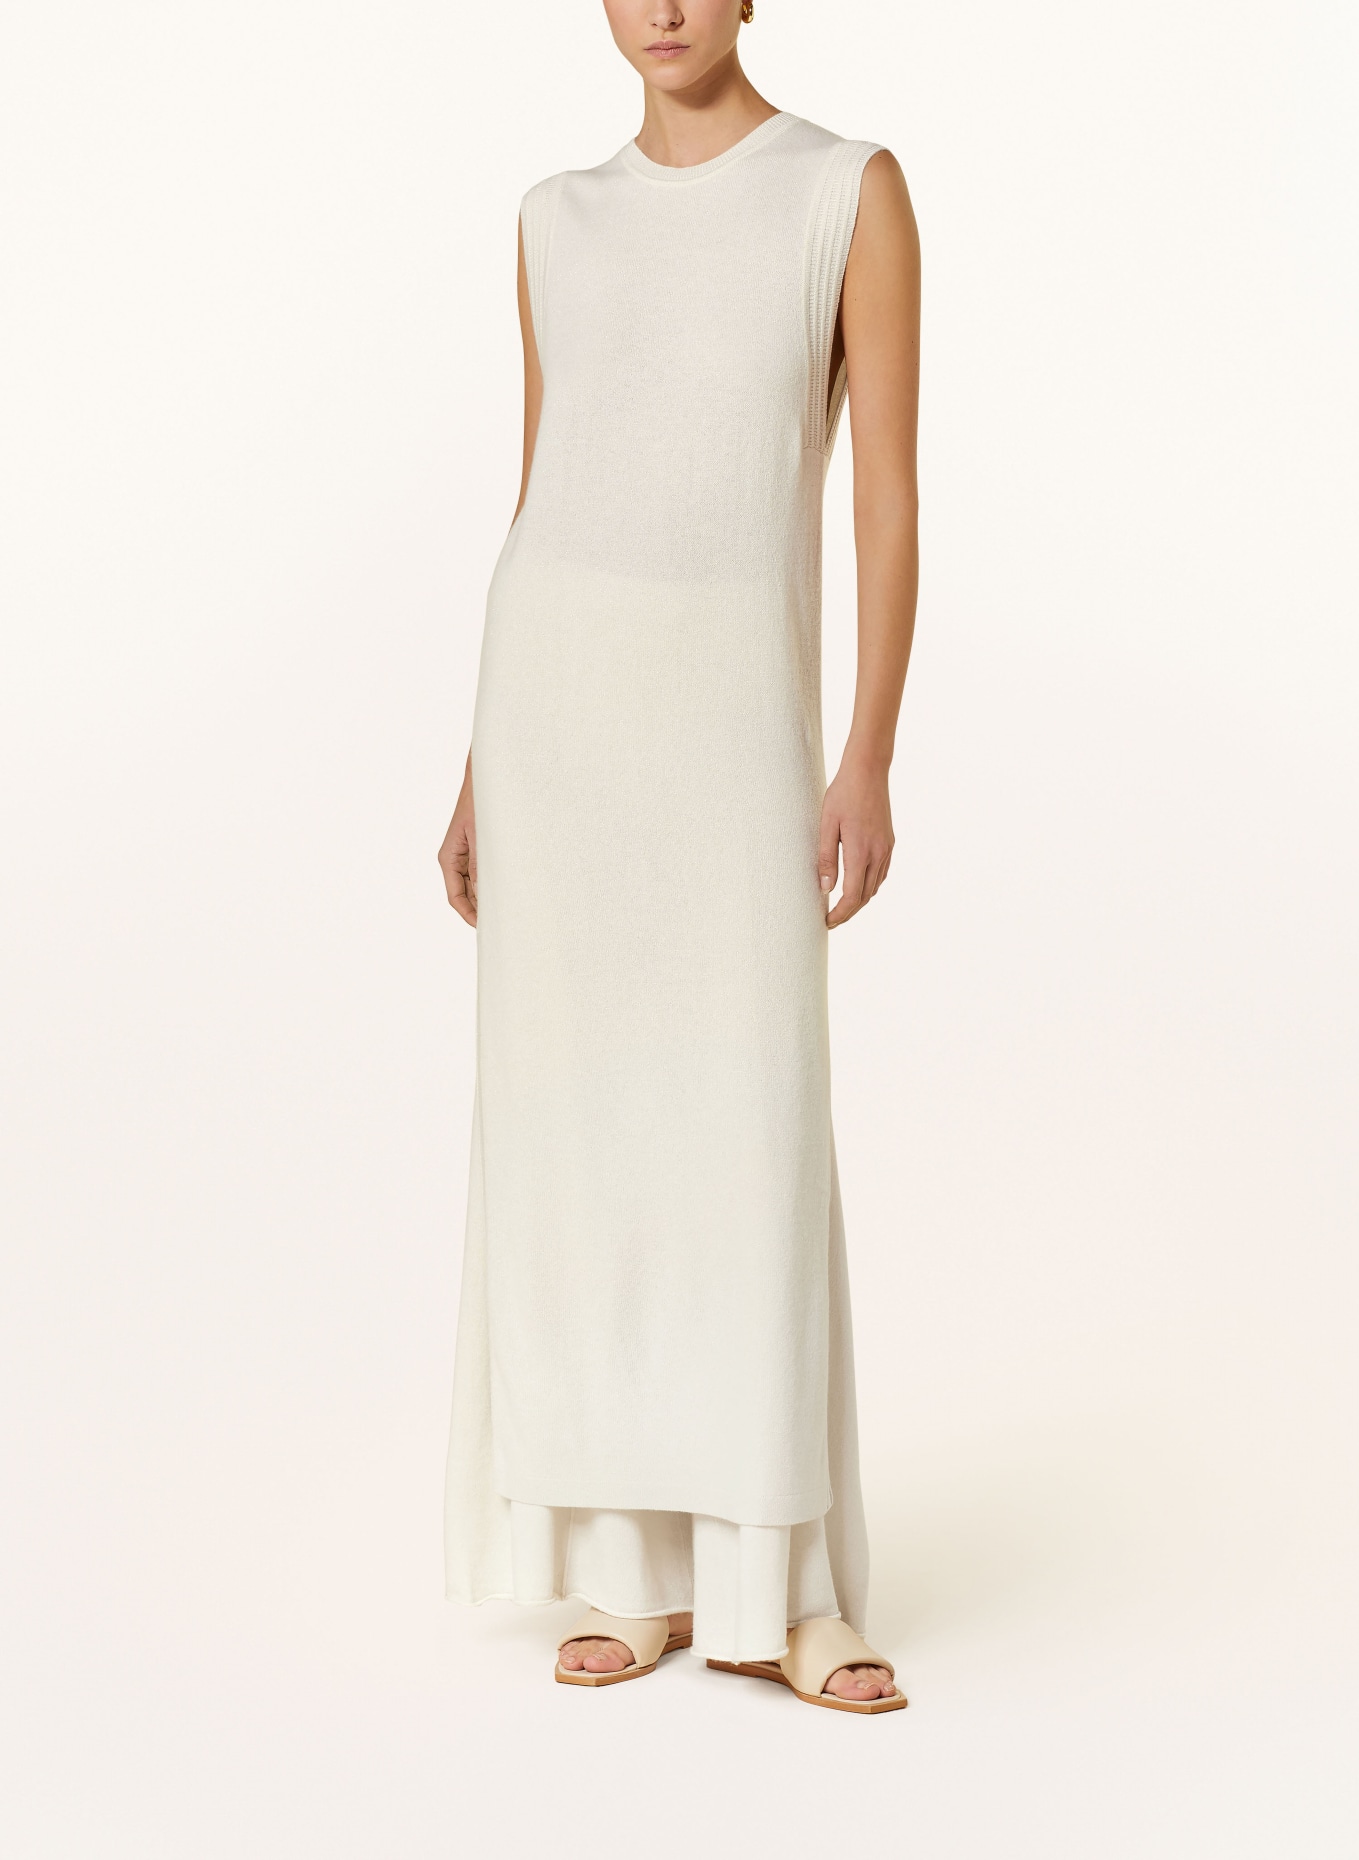 LISA YANG Knit dress made of cashmere with glitter thread, Color: CREAM (Image 2)